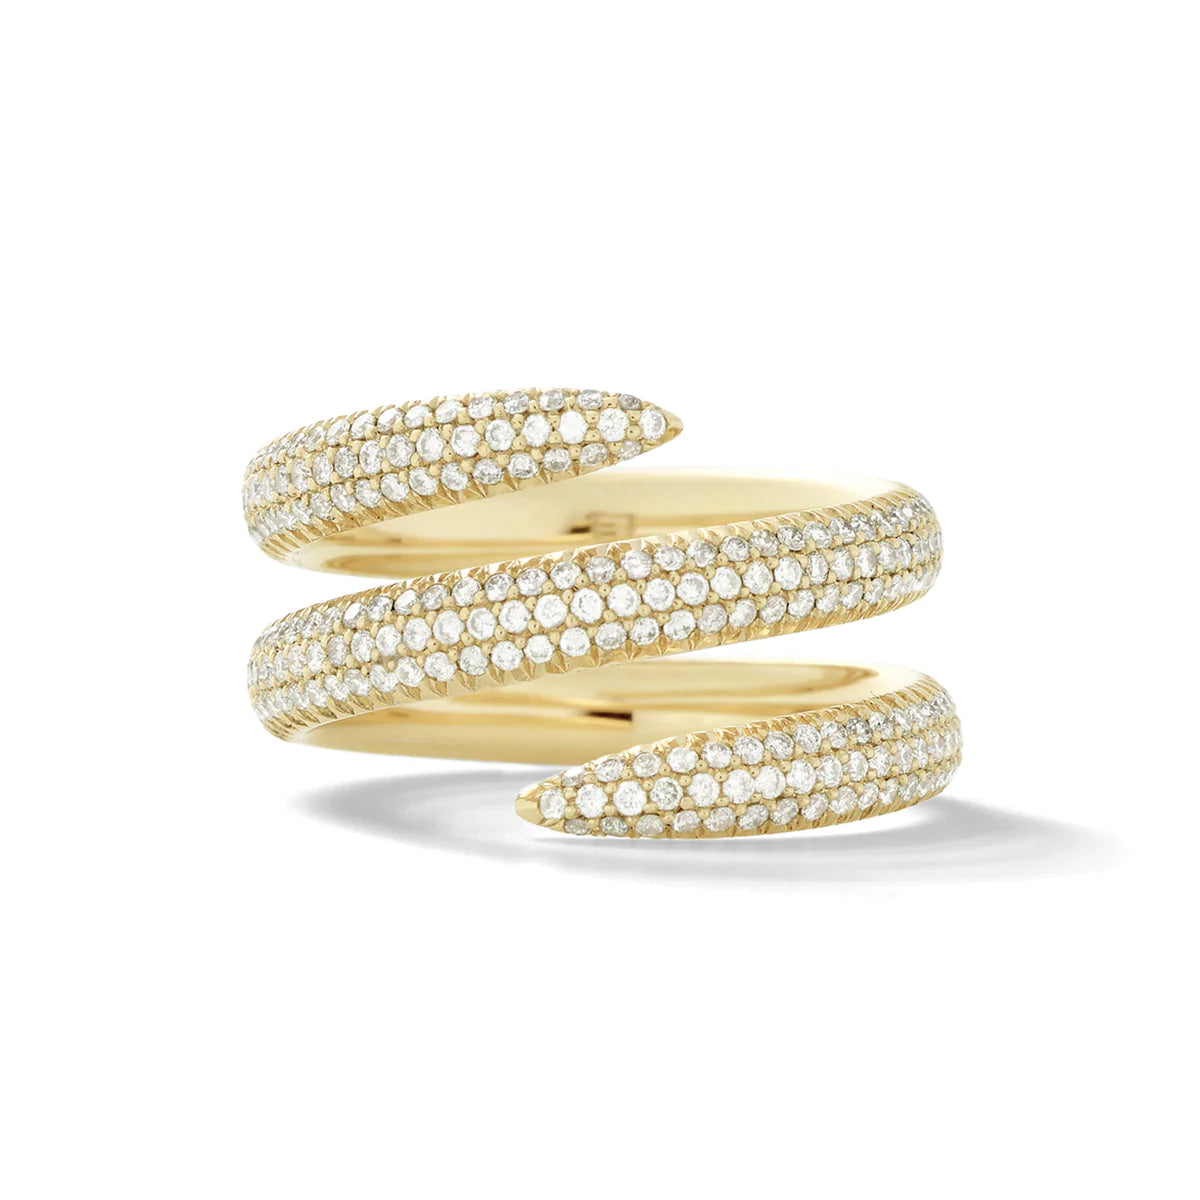 Load image into Gallery viewer, Eva Fehren Pave Snake Ring in 18K Yellow Gold with White Diamonds
